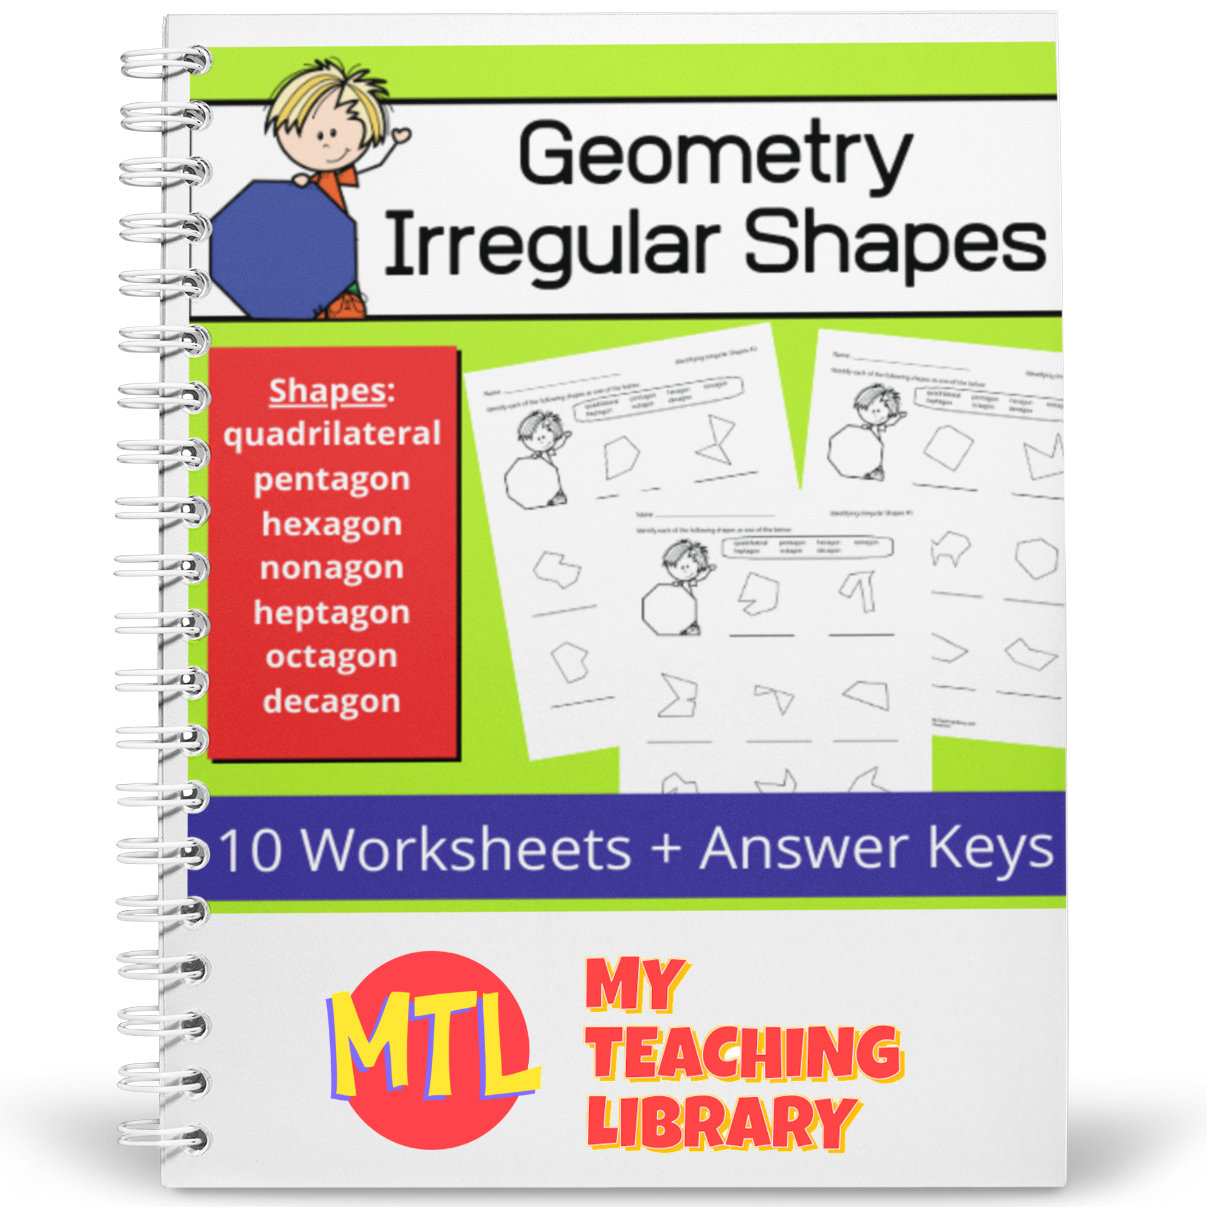 In geometry, students need to be able to identify a variety of irregular shapes! Here are 10 worksheets (with answer keys), students must identify the following shapes:


- quadrilateral

- pentagon

- hexagon

- nonagon

- heptagon

- octagon

- decagon